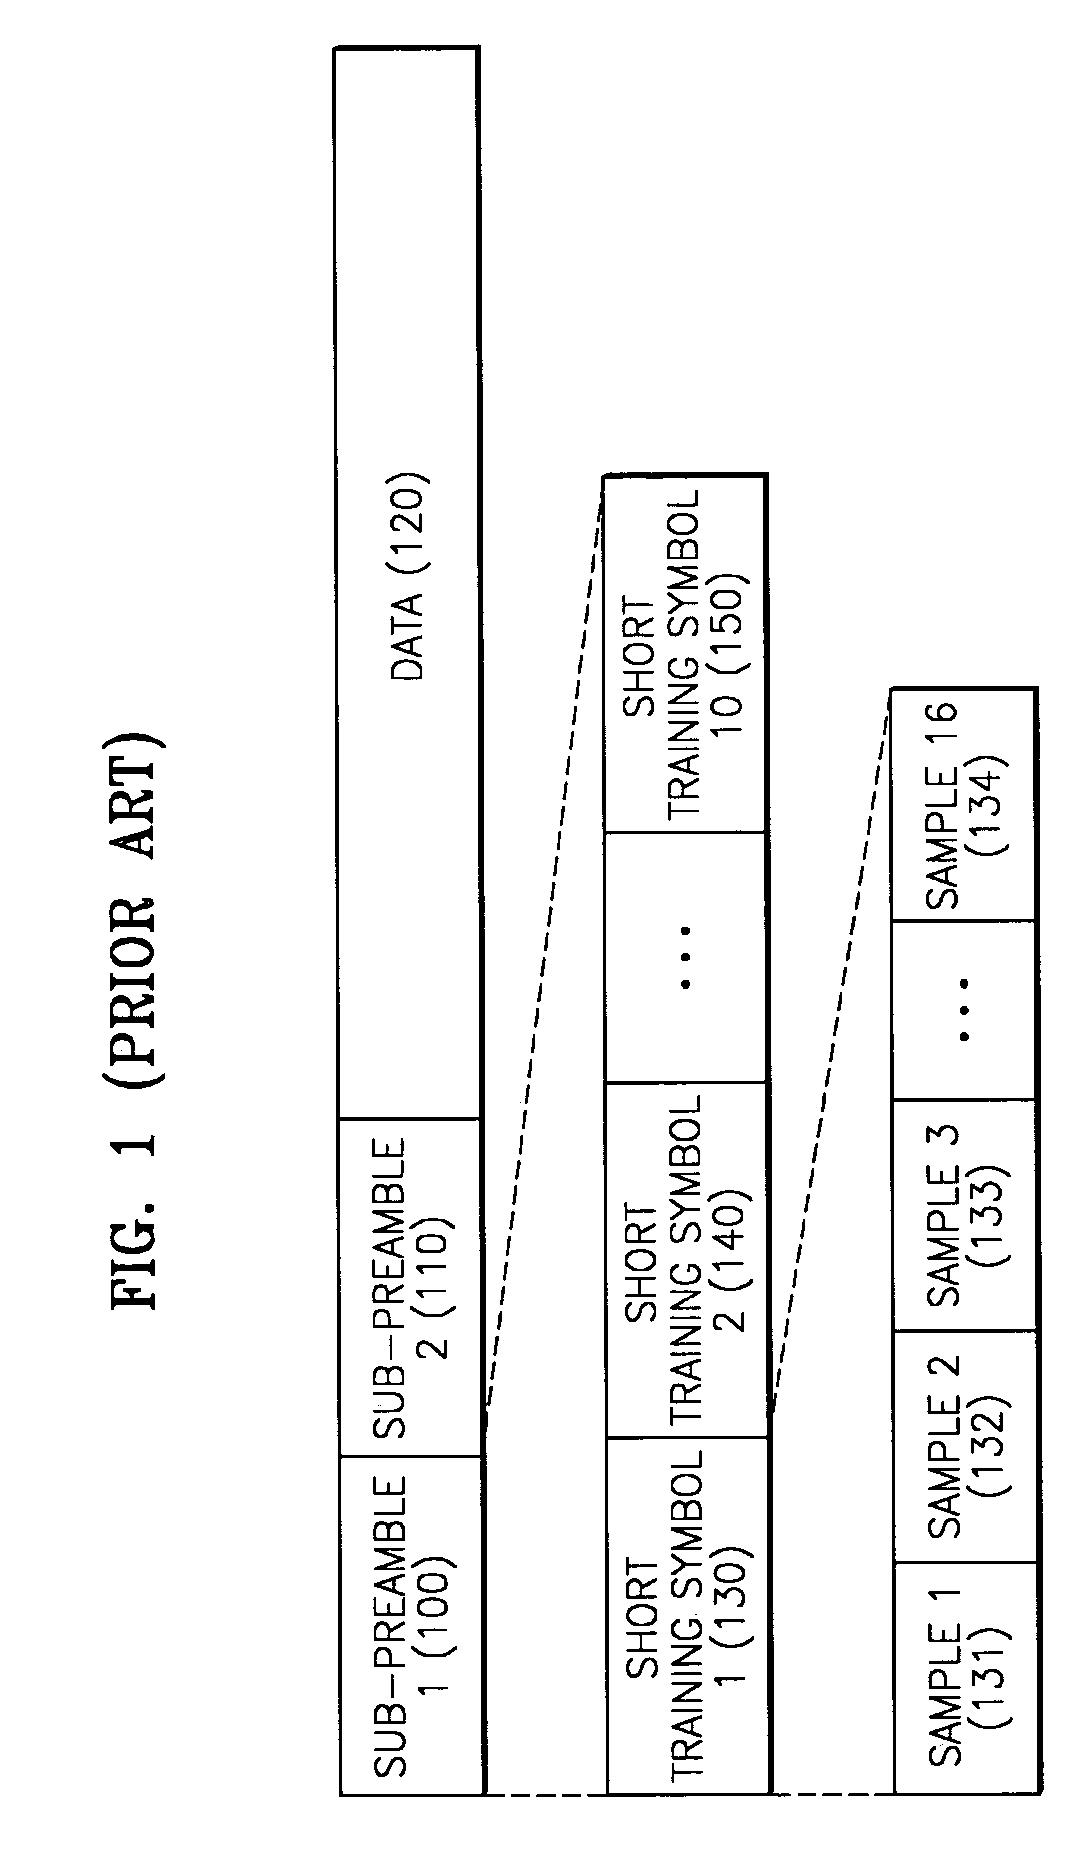 OFDM-based timing synchronization detection apparatus and method